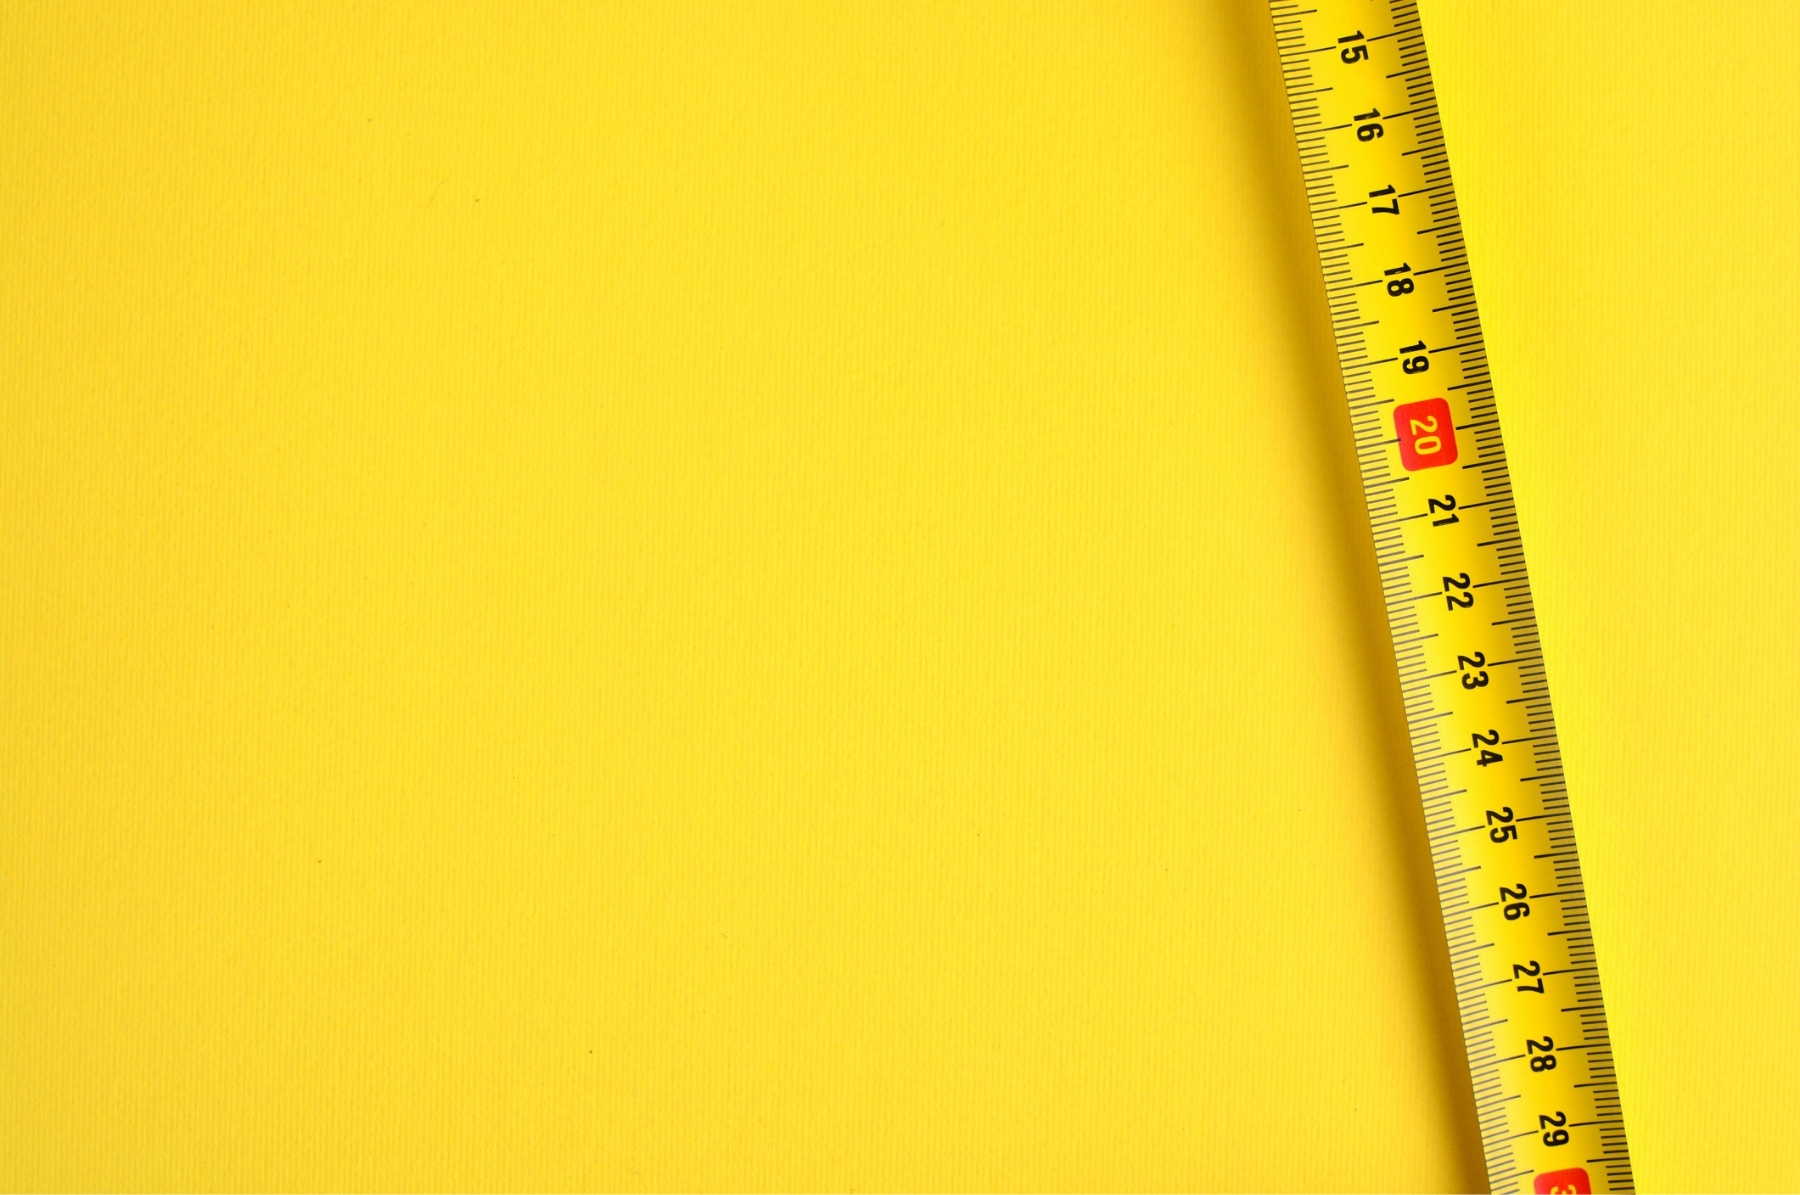 tape measure on a yellow background